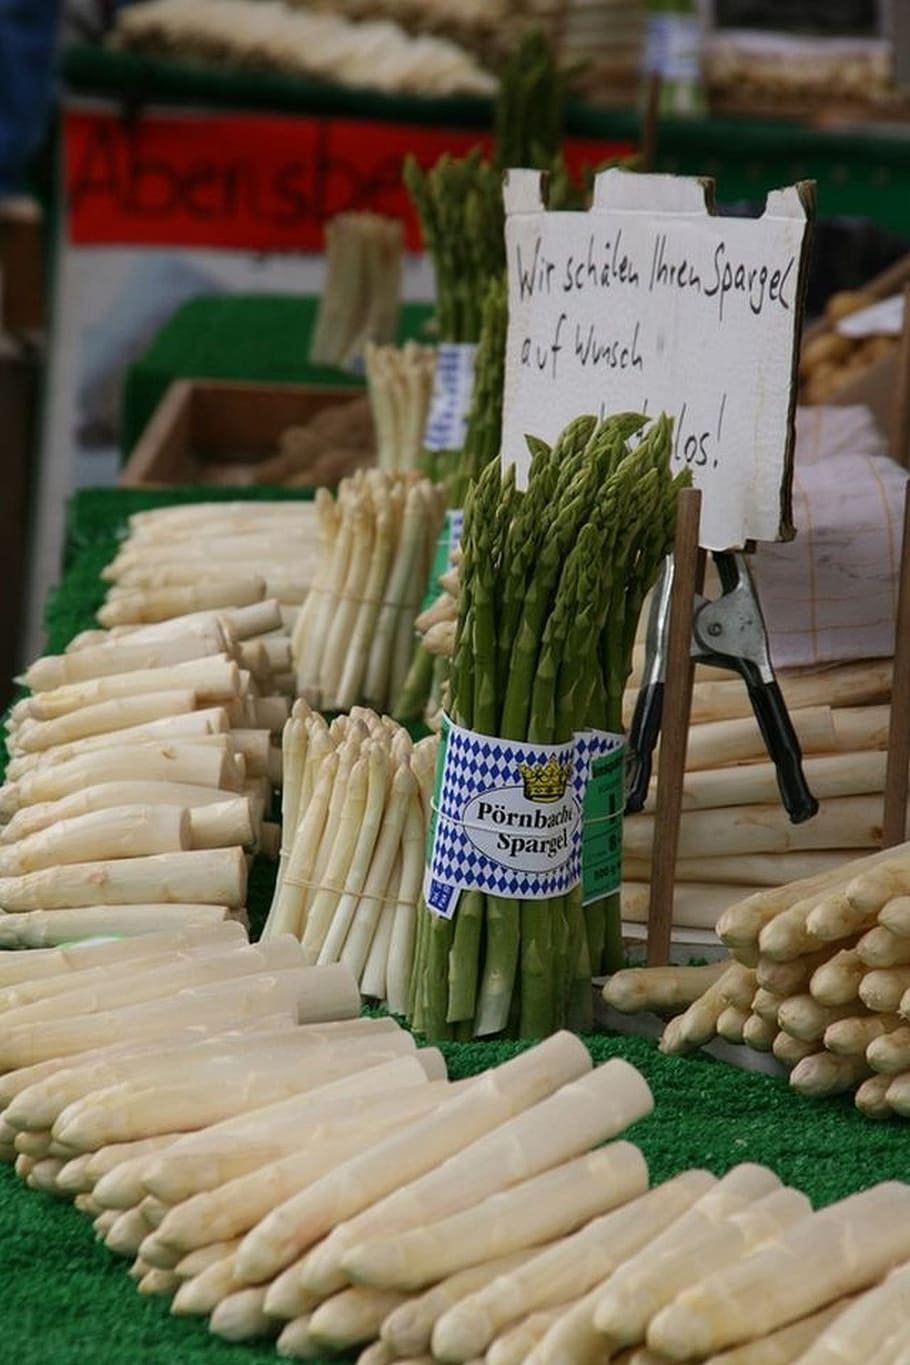 asparagus, vegetables, market, healthy, food and drink, food, retail, market stall, healthy eating, freshness